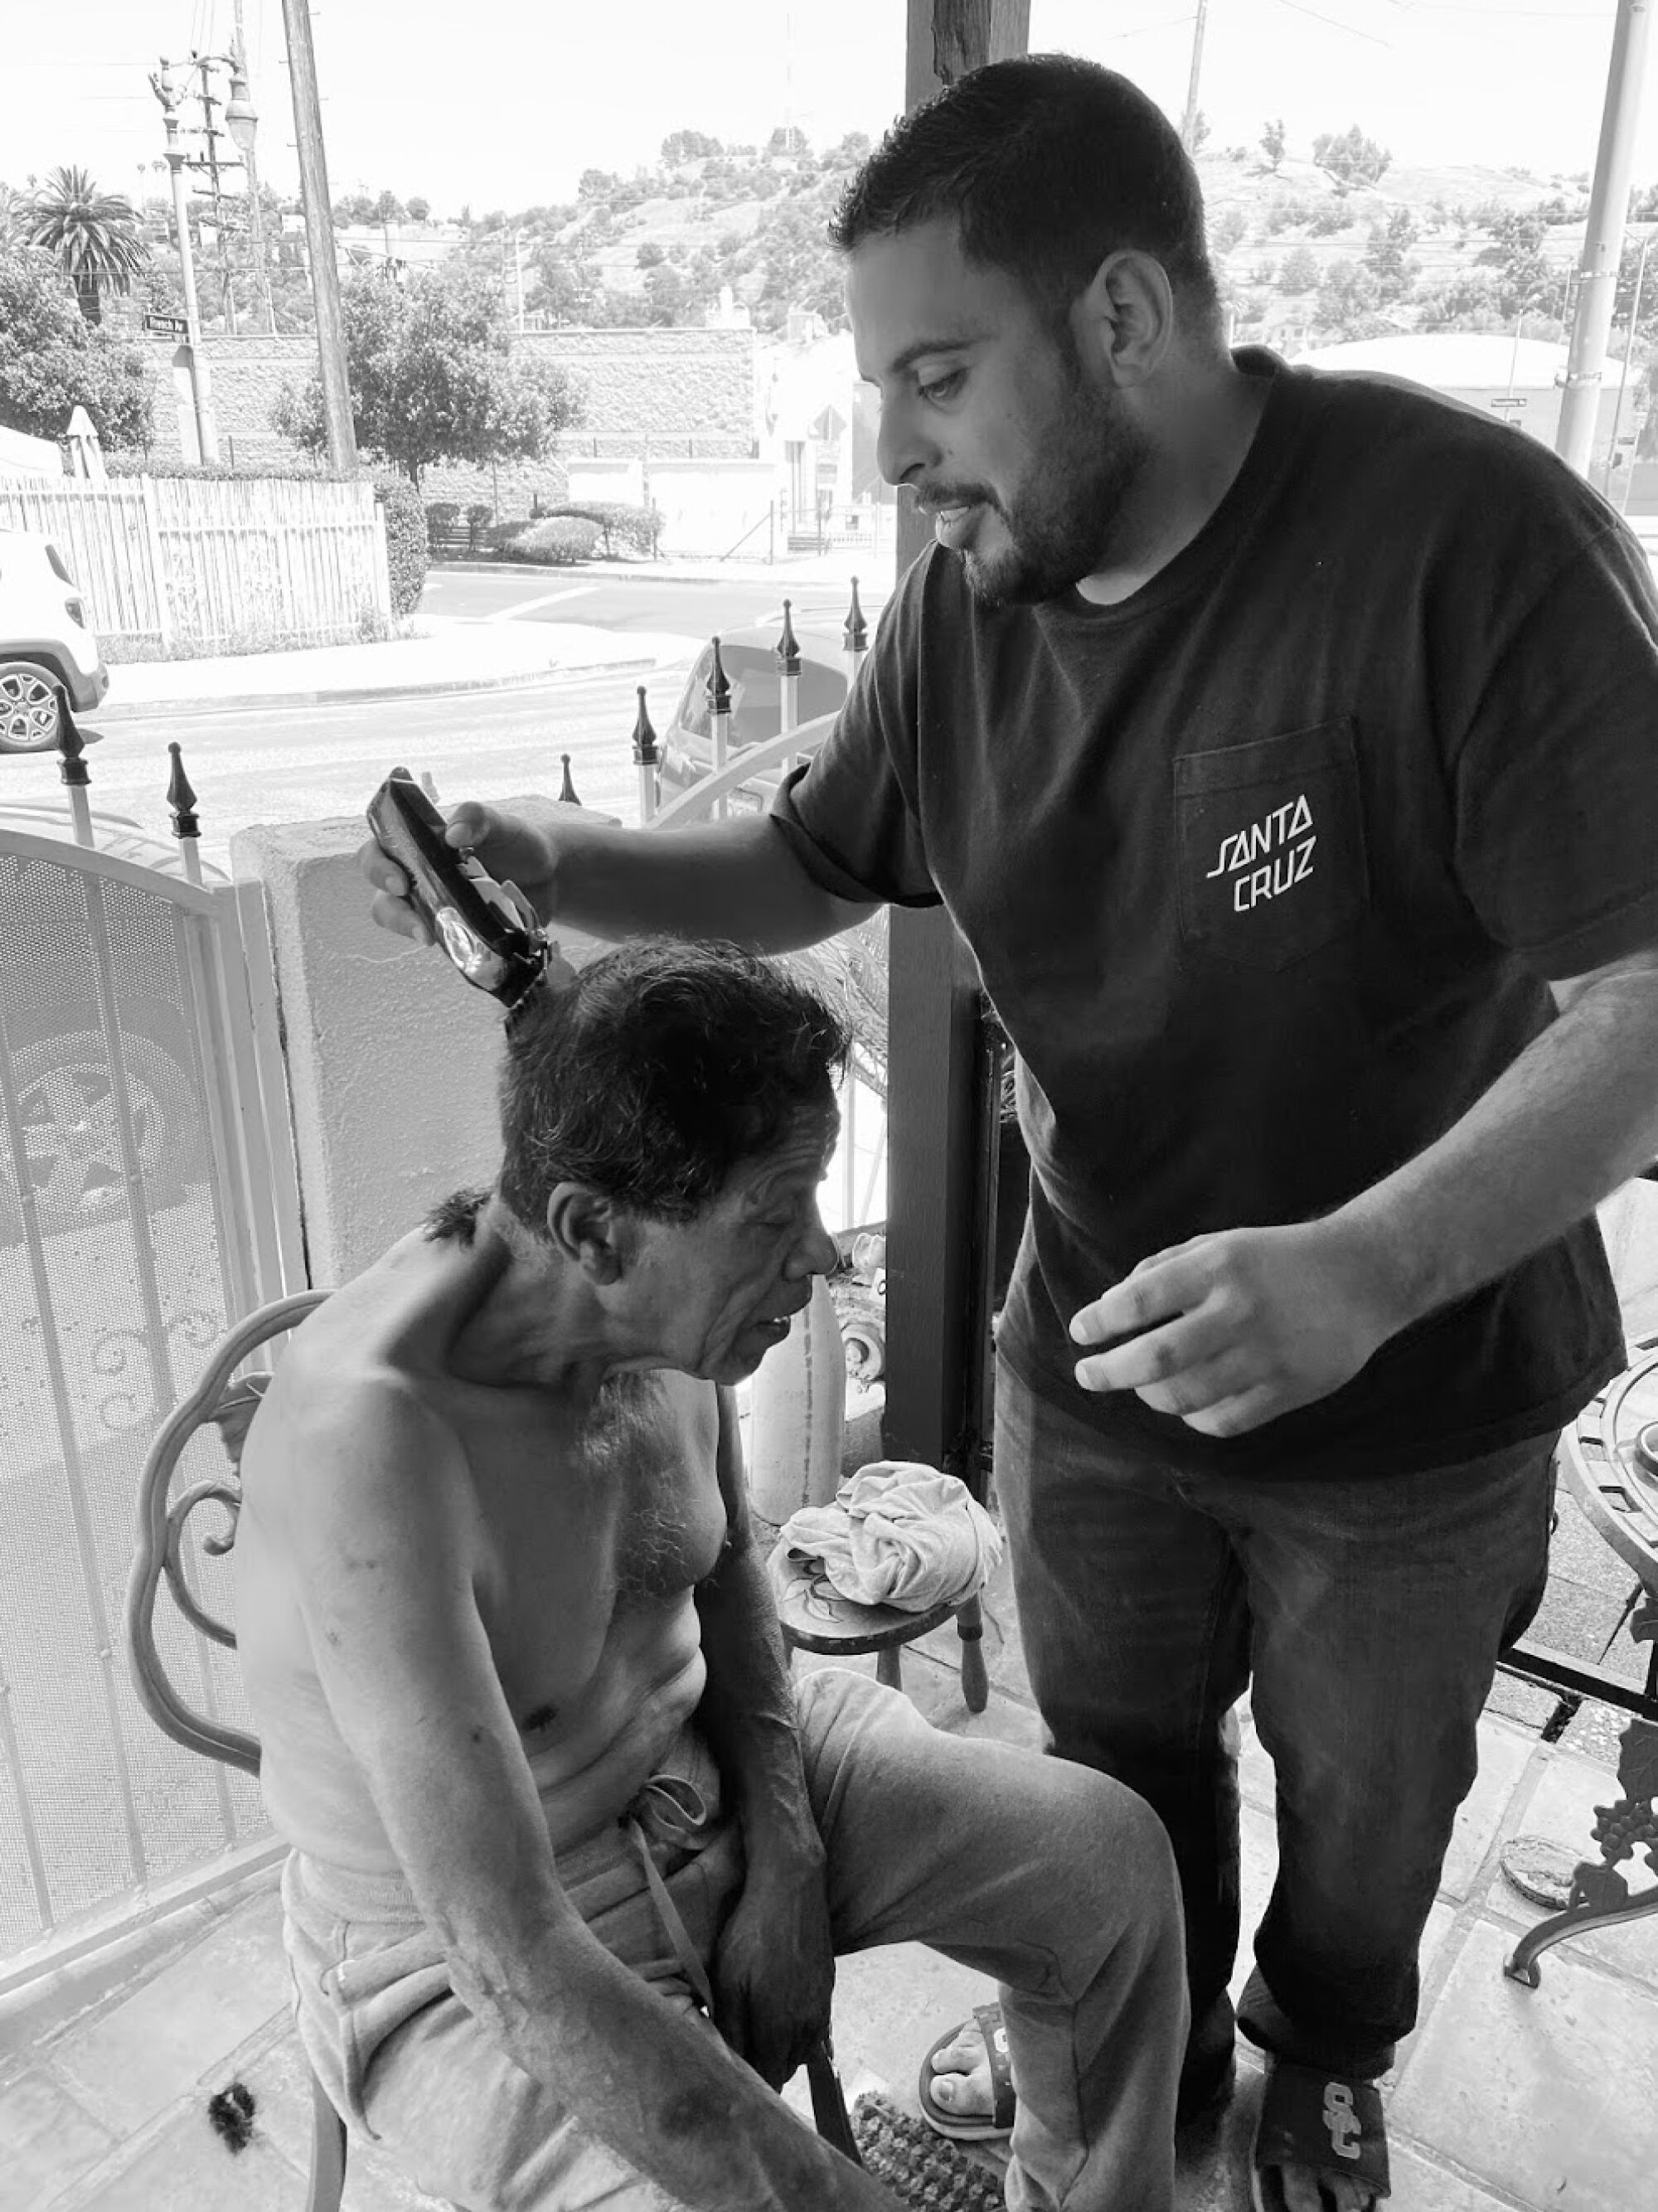 A man uses clippers to cut his father's hair on a porch